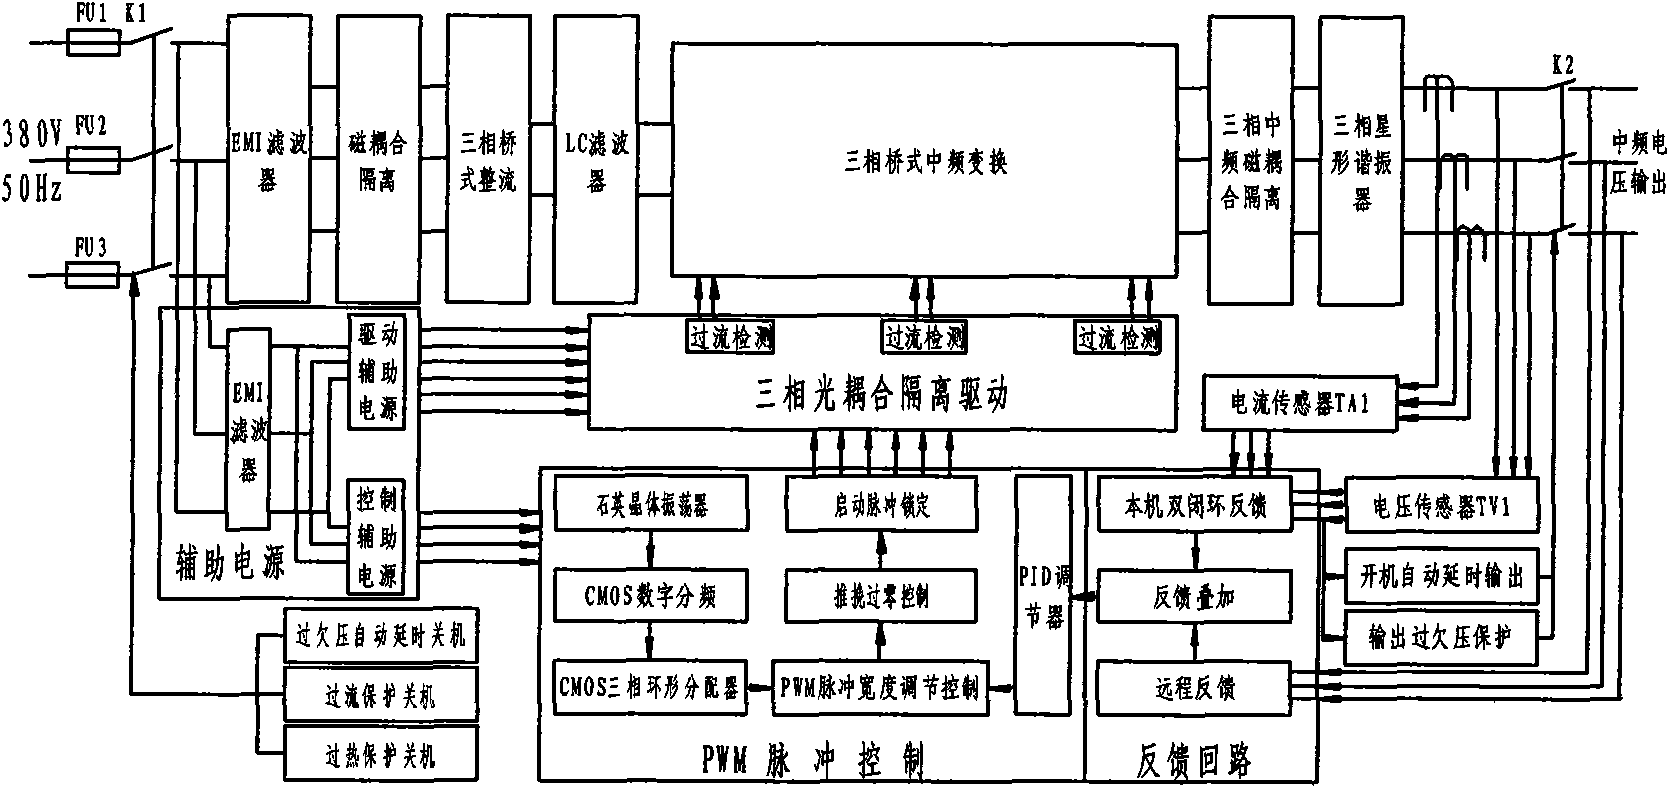 Three-phase intermediate frequency power supply